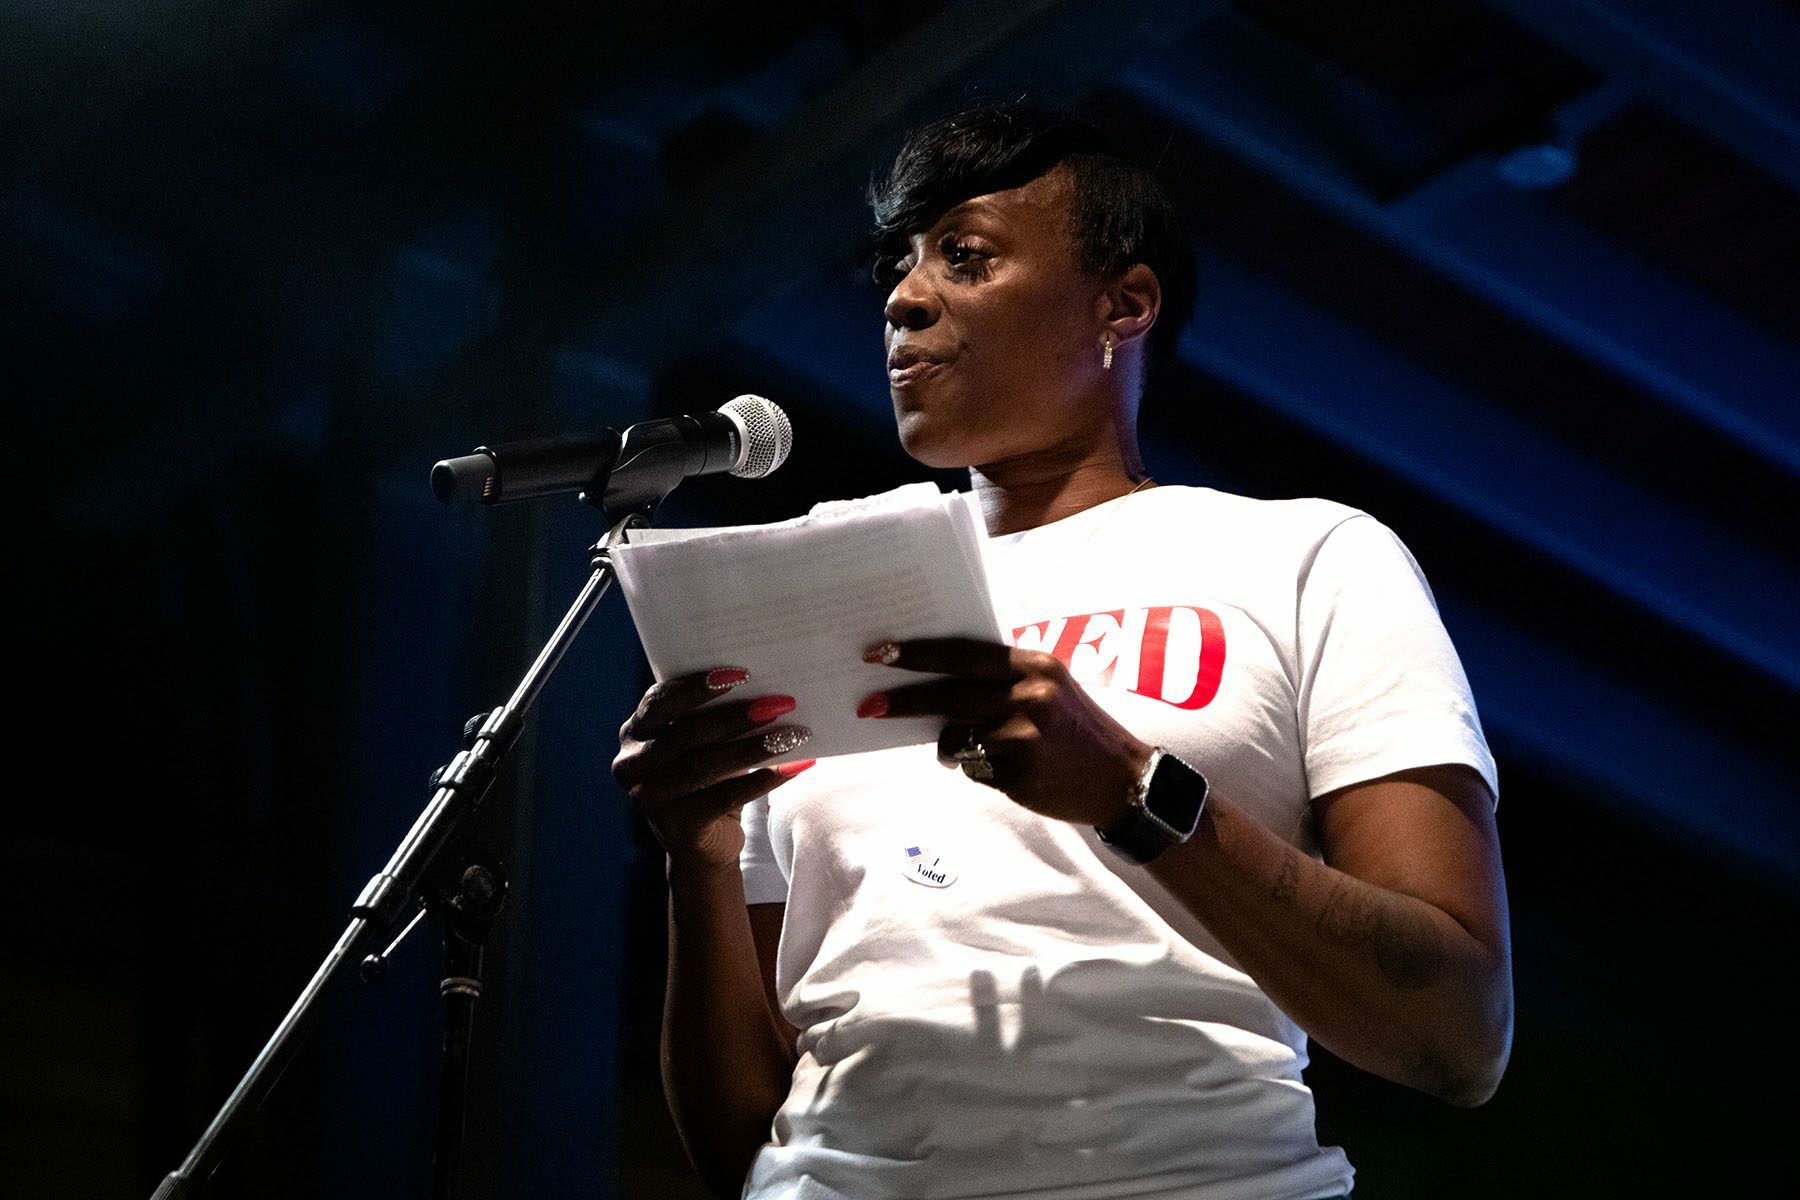 Crystal Mason speaks on stage at a Beto O'Rourke rally in Forth Worth, Texas in March 2022.